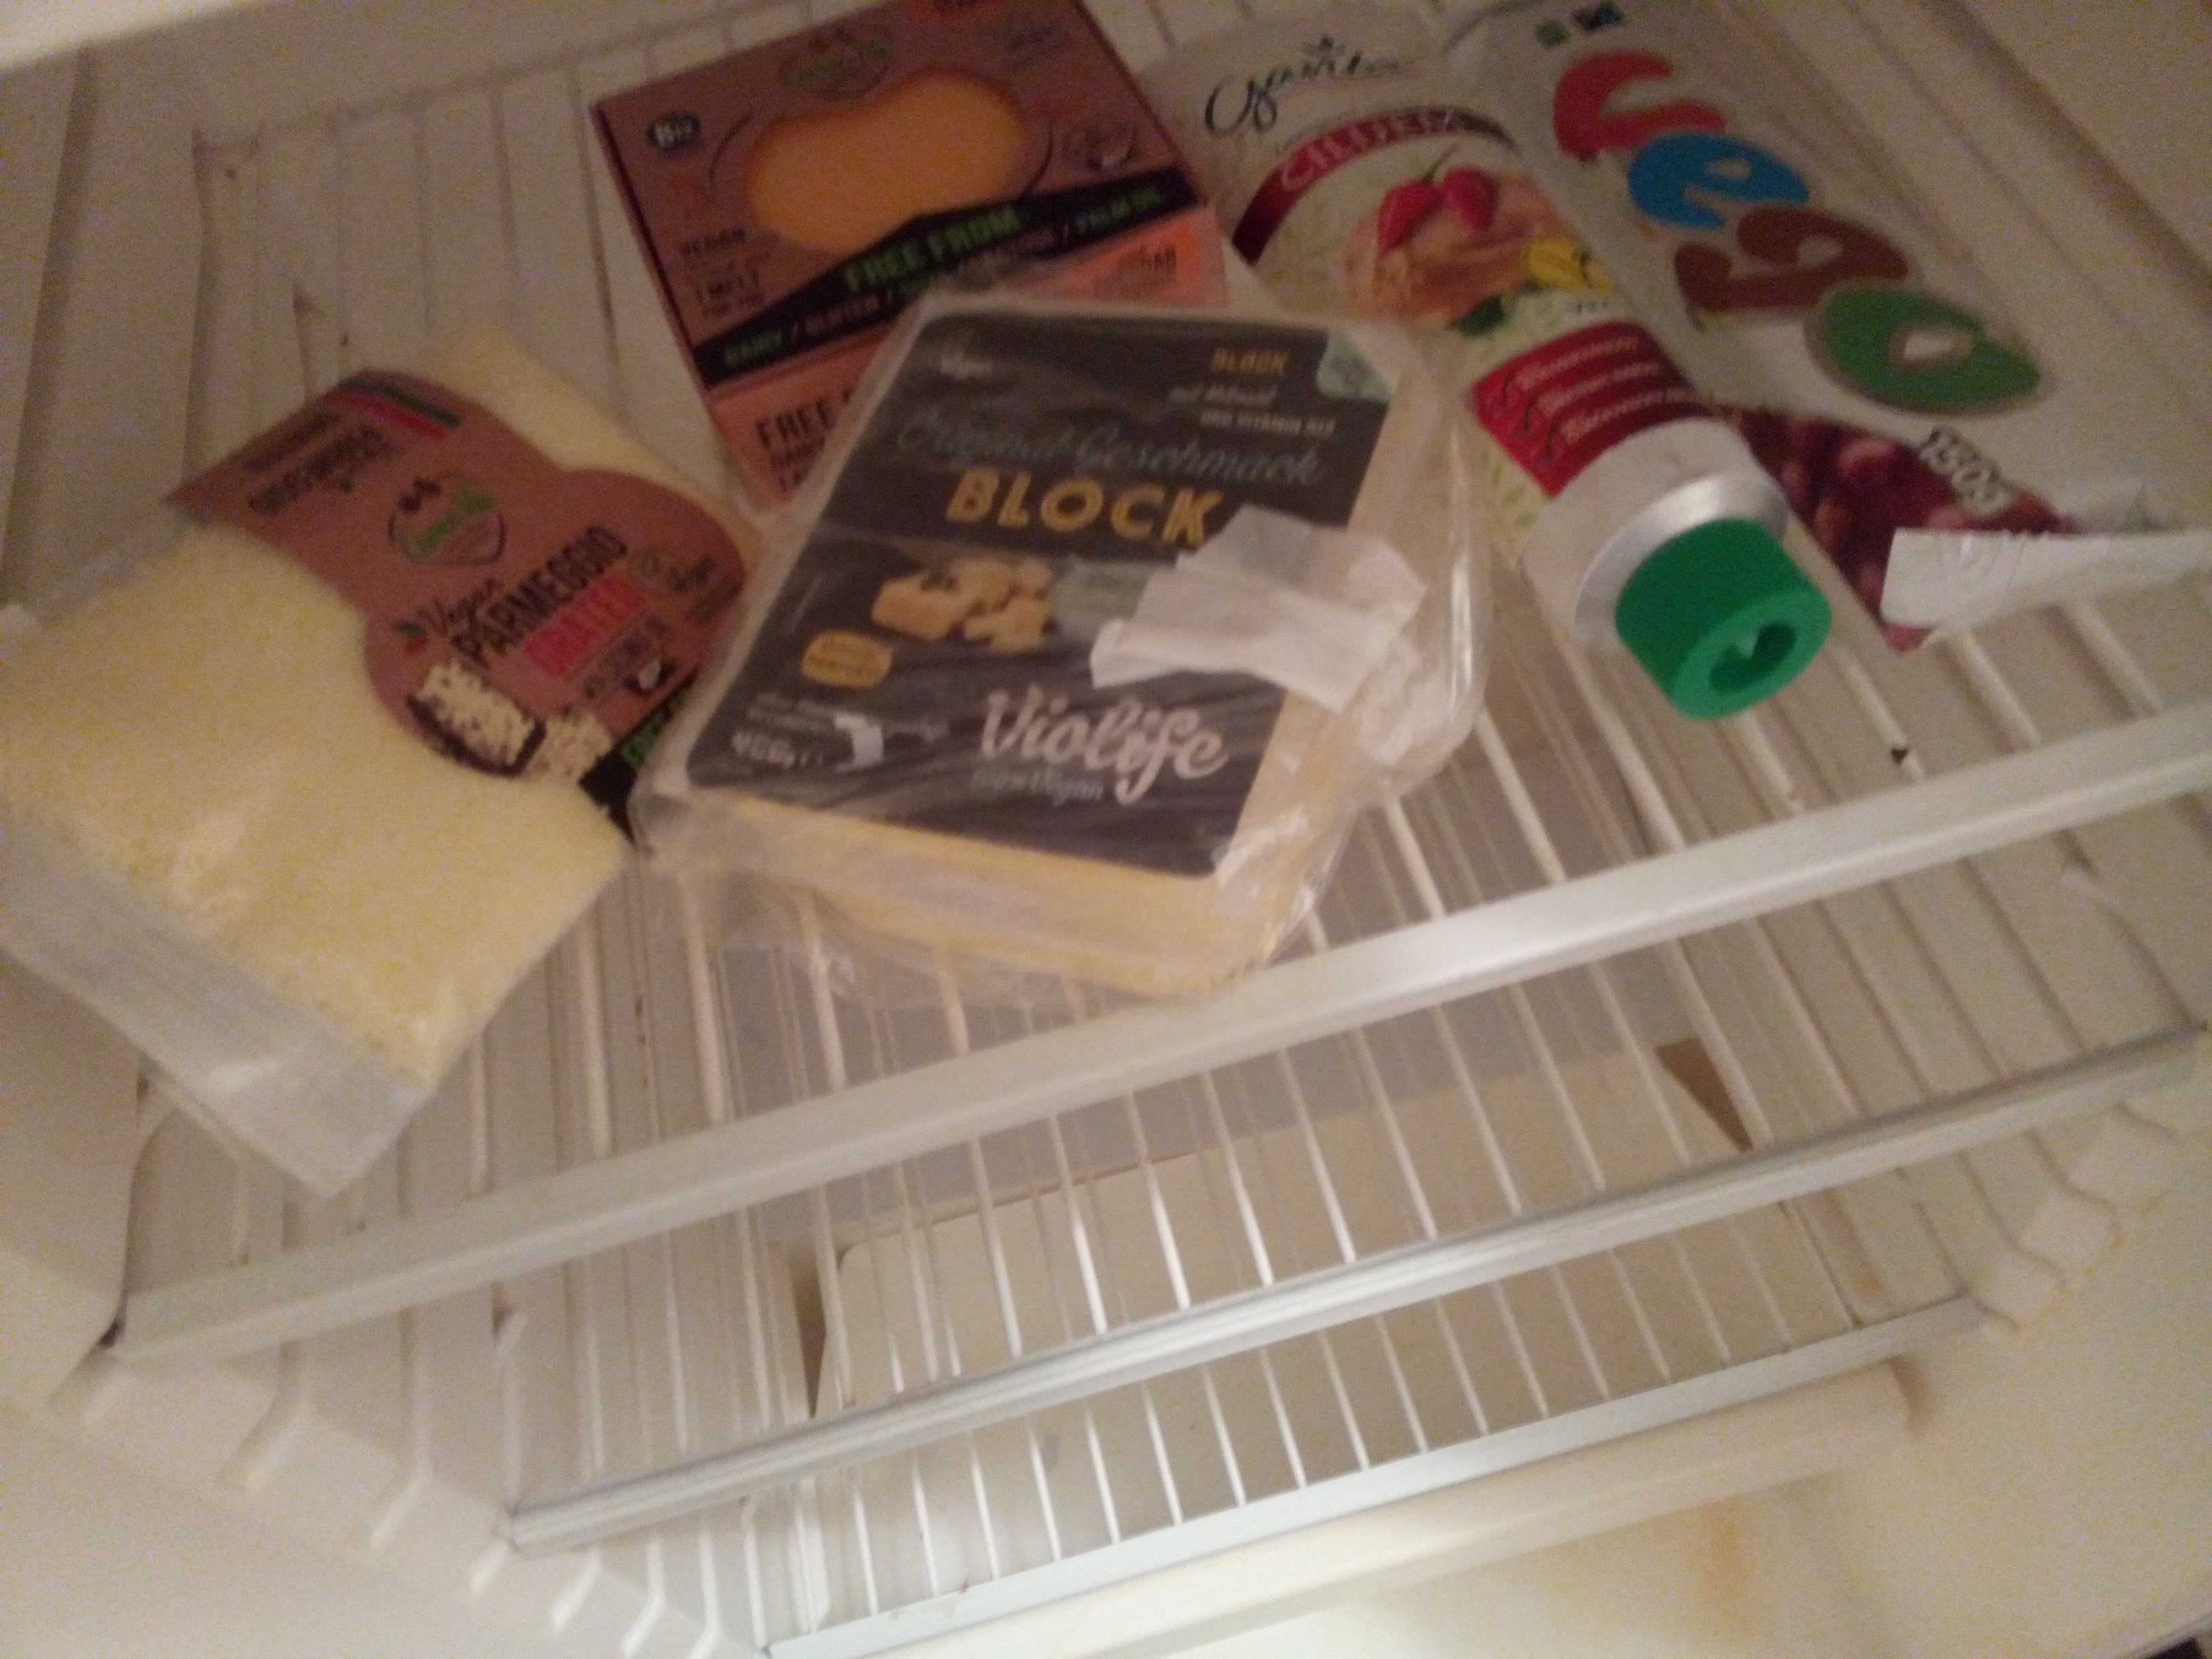 A fridge devoid of anything but vegan cheese and chocolate